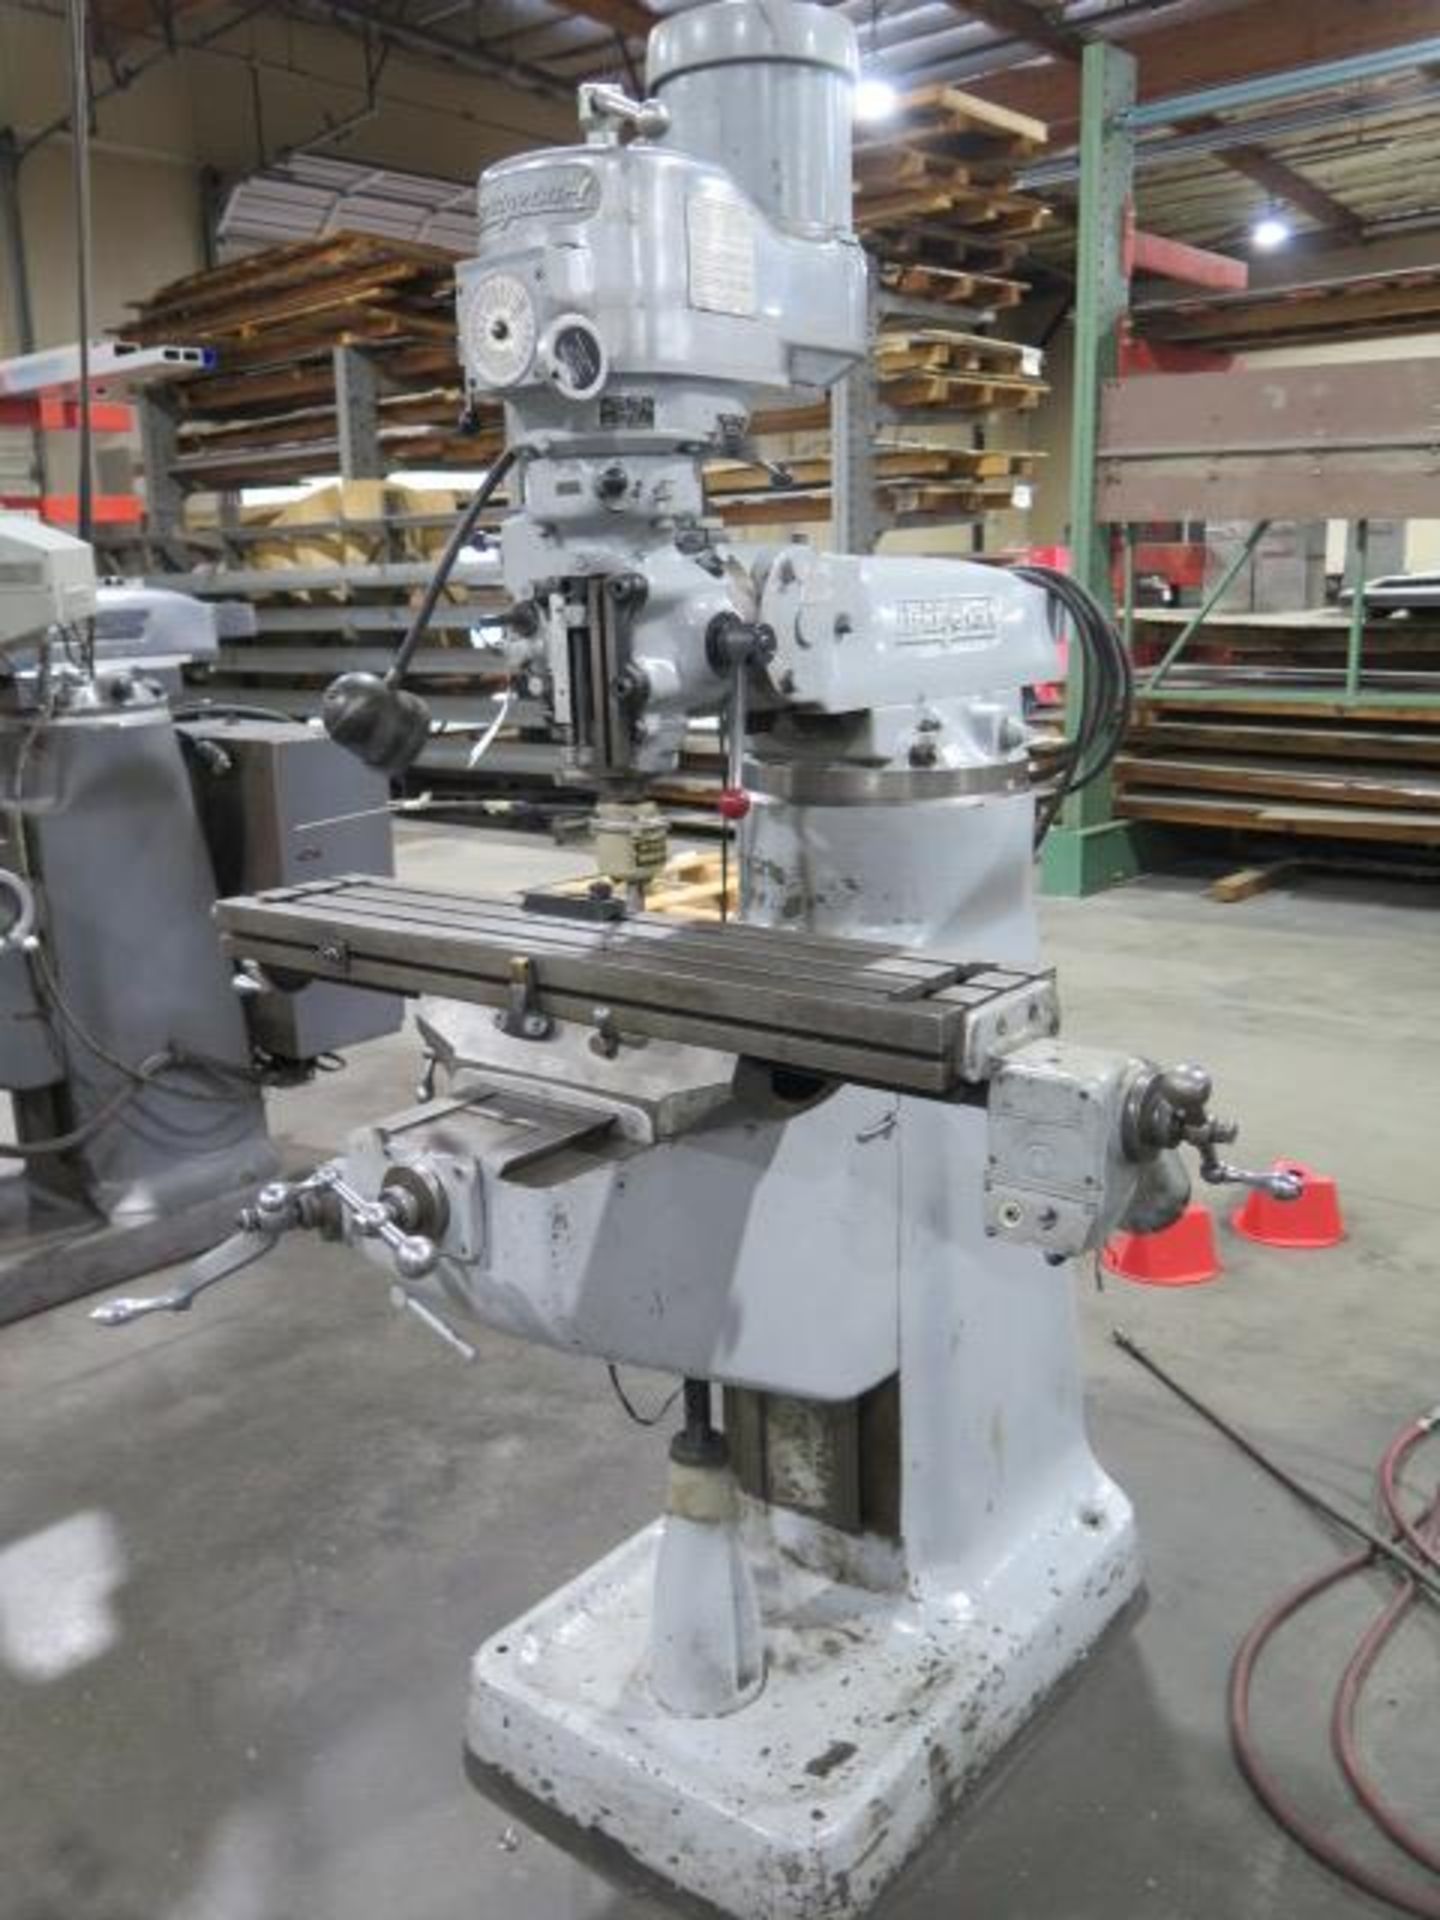 Bridgeport Vertical Mill s/n 157816 w/ 60-4200 Dial Change RPM, Chrome Ways. 9” x 42” Table - Image 2 of 6